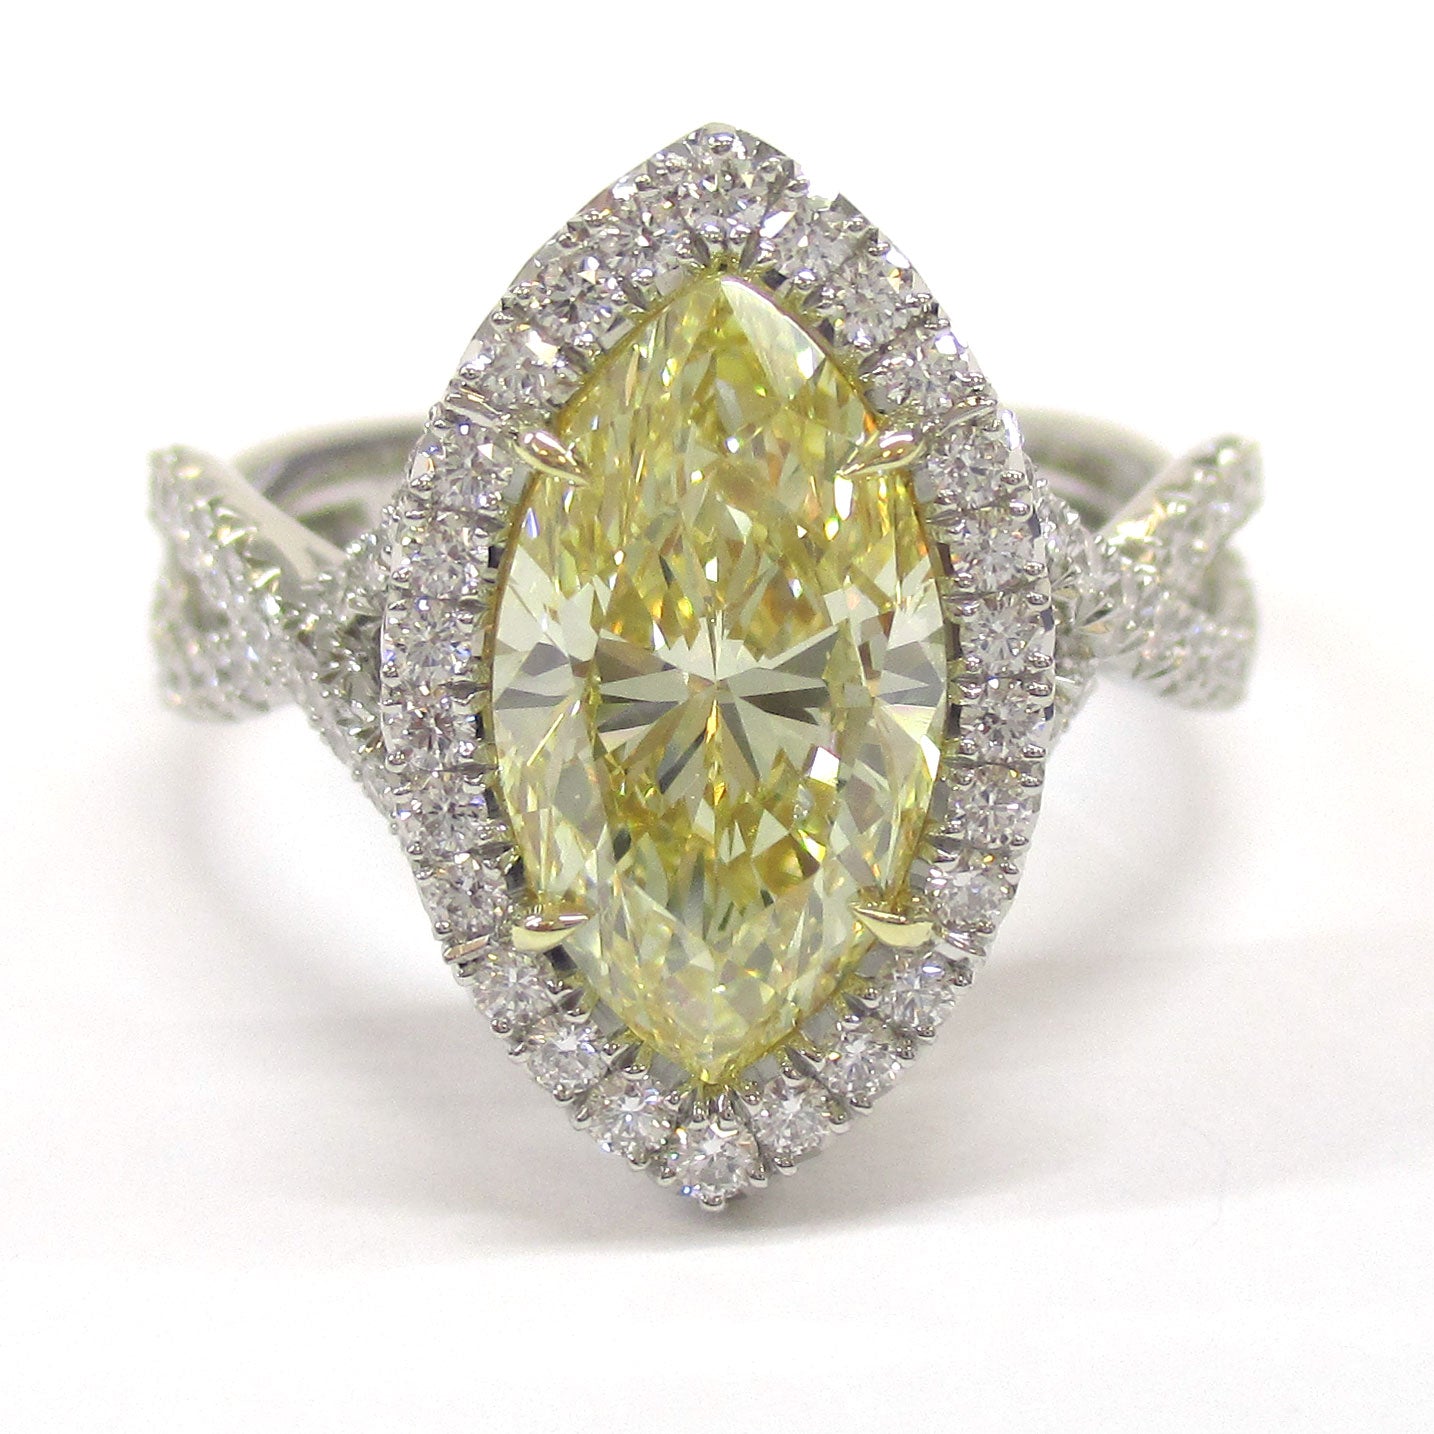 Fancy Yellow Marquise Diamond Ring with Halo and Twist Shoulders